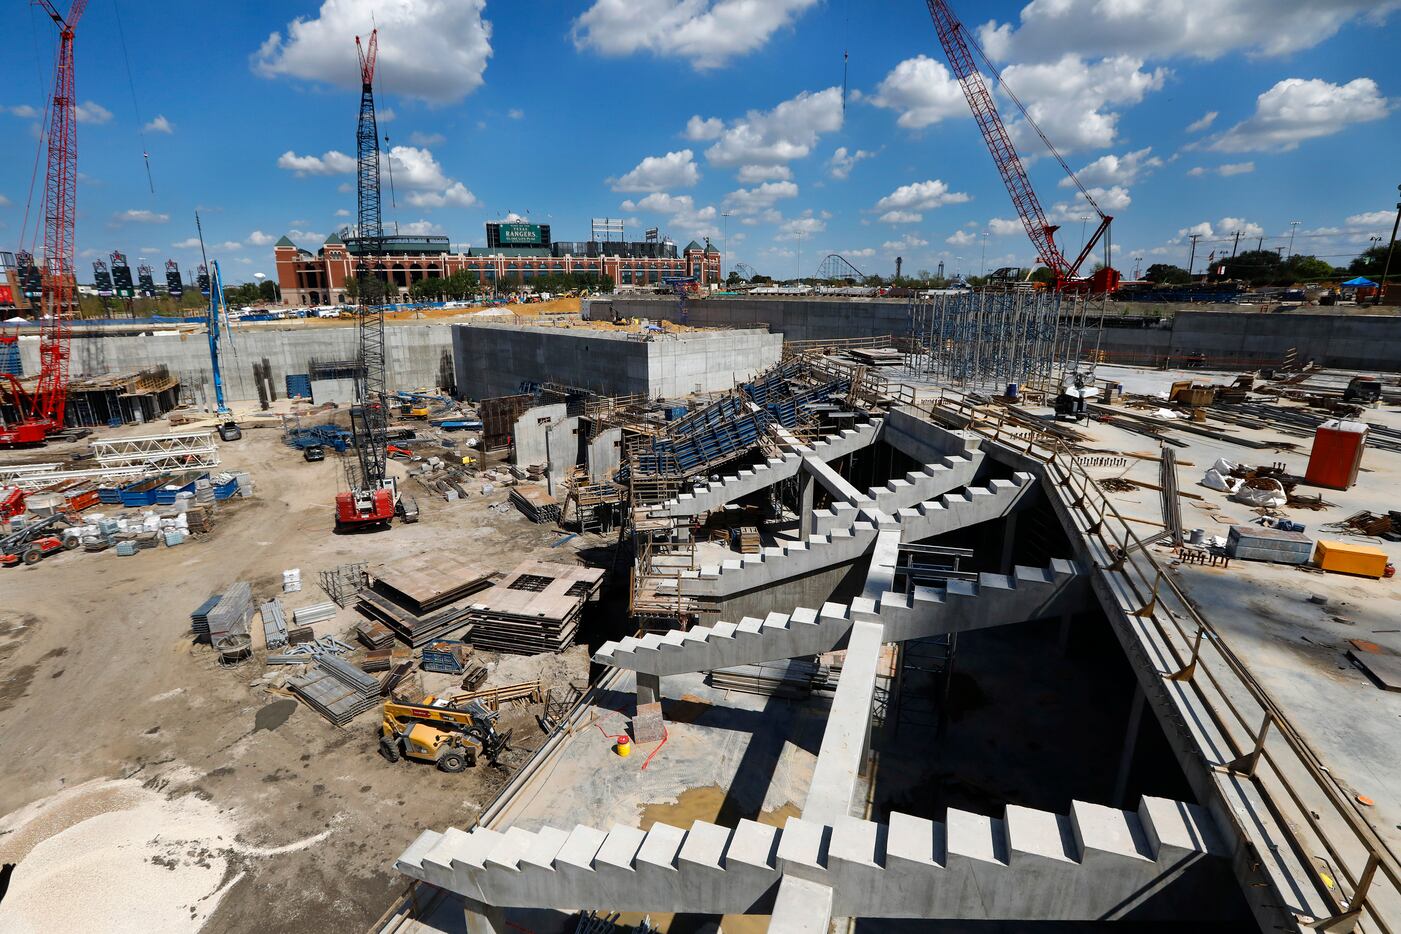 The right field seating supports are in place at the new Globe Life Field under construction...